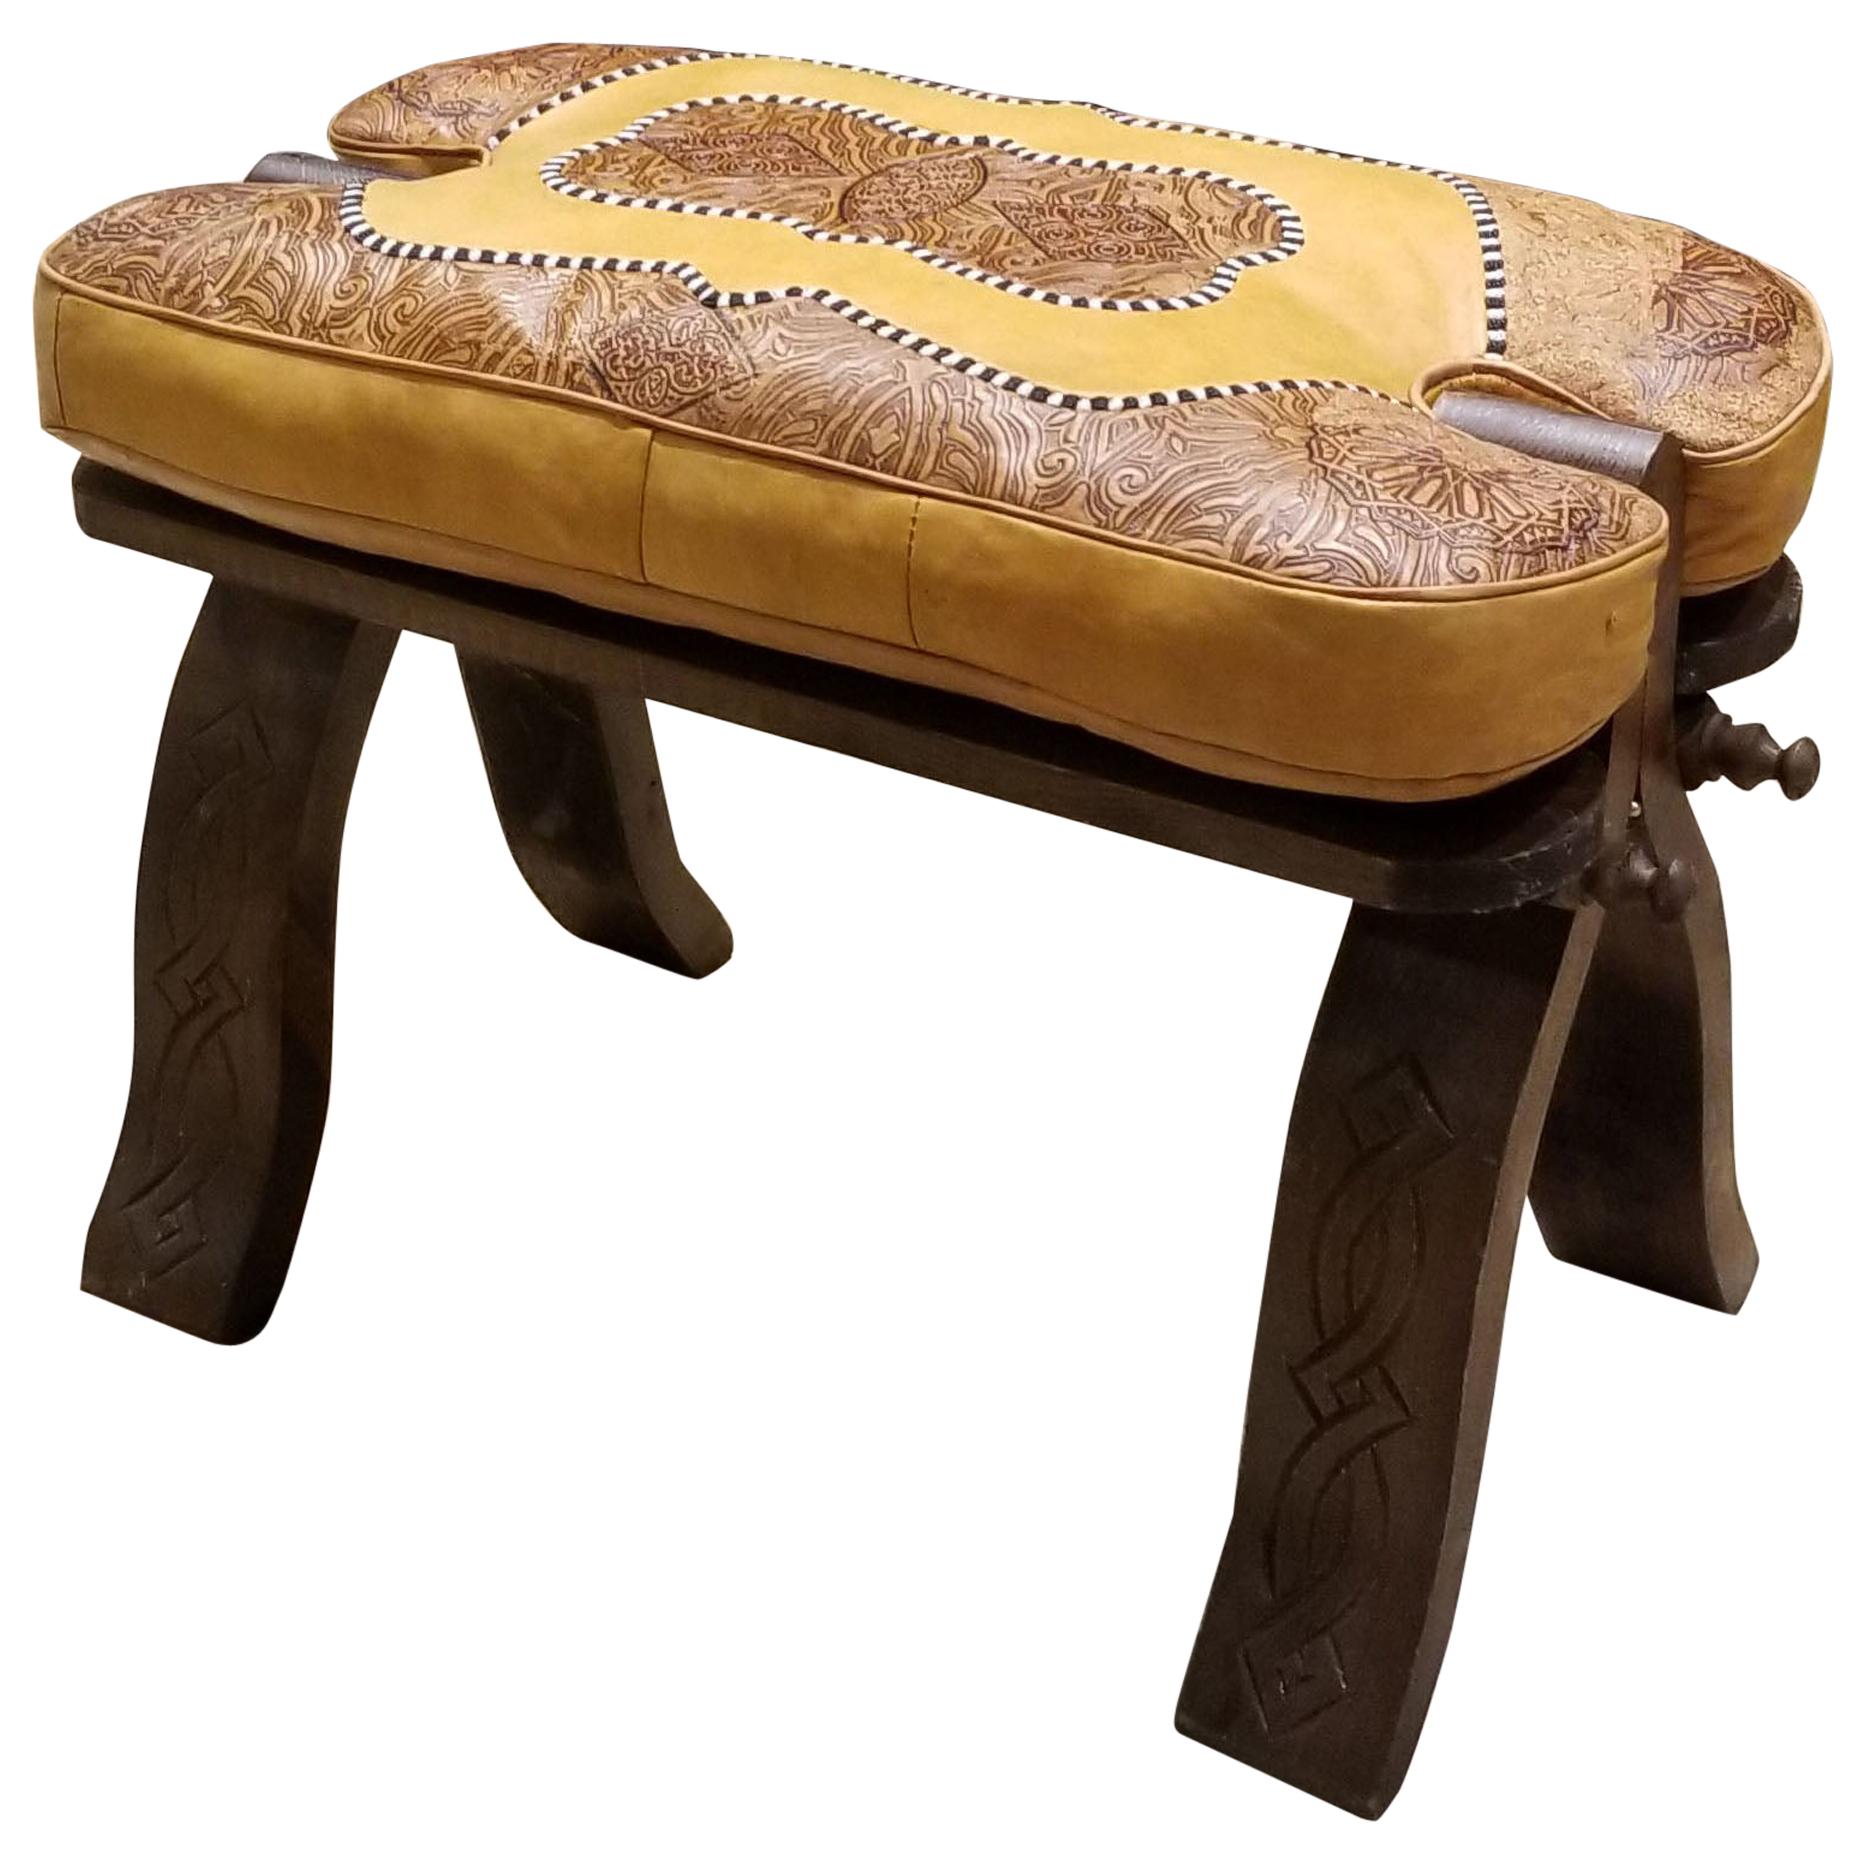  Handmade Moroccan Camel Seat, Ditressed Cushion For Sale